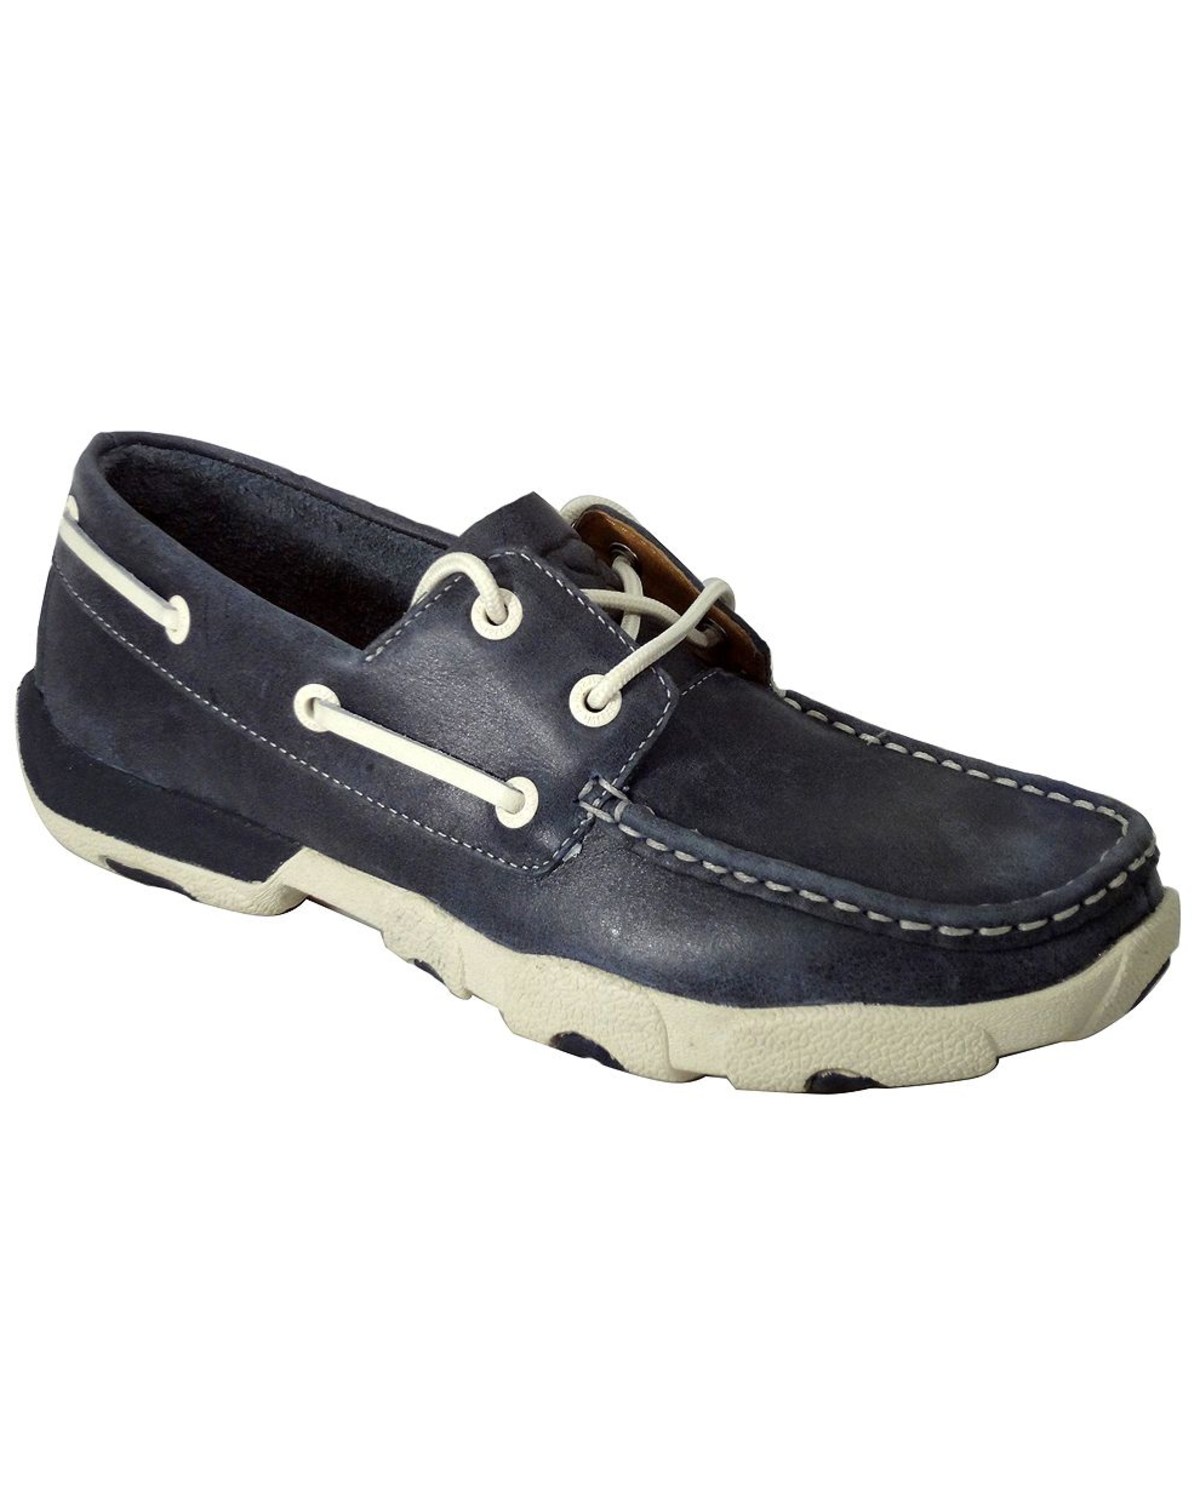 women's casual boat shoes